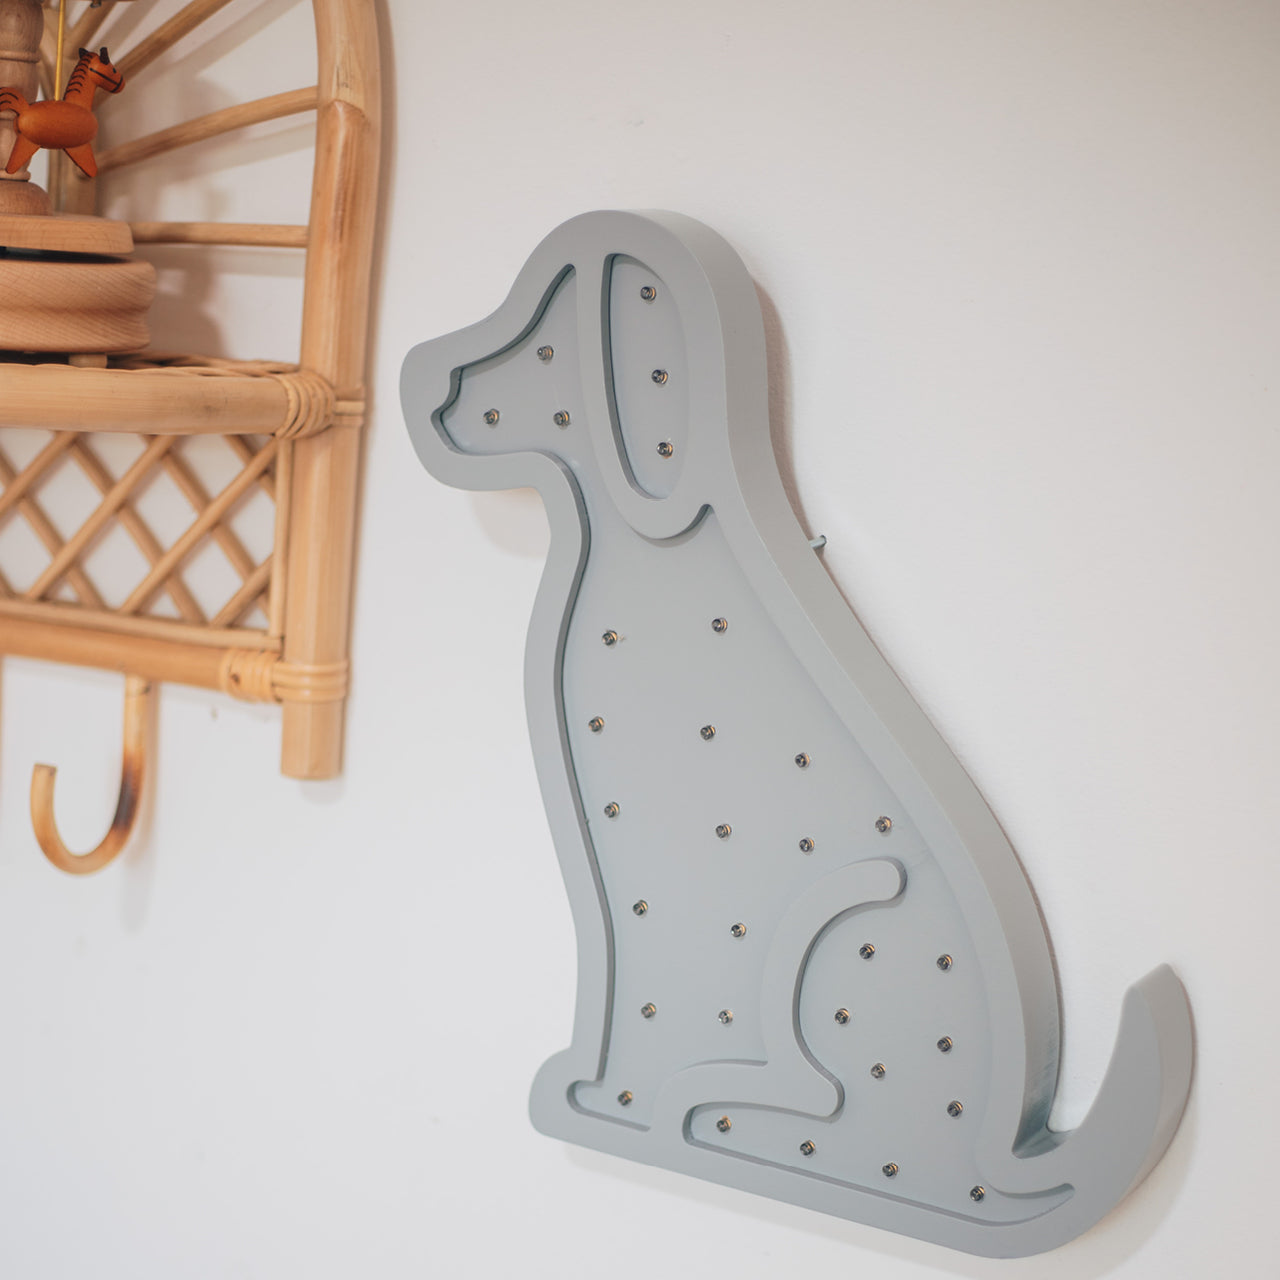 Lifestyle shot of Pawfect Wooden Dog Light hung up